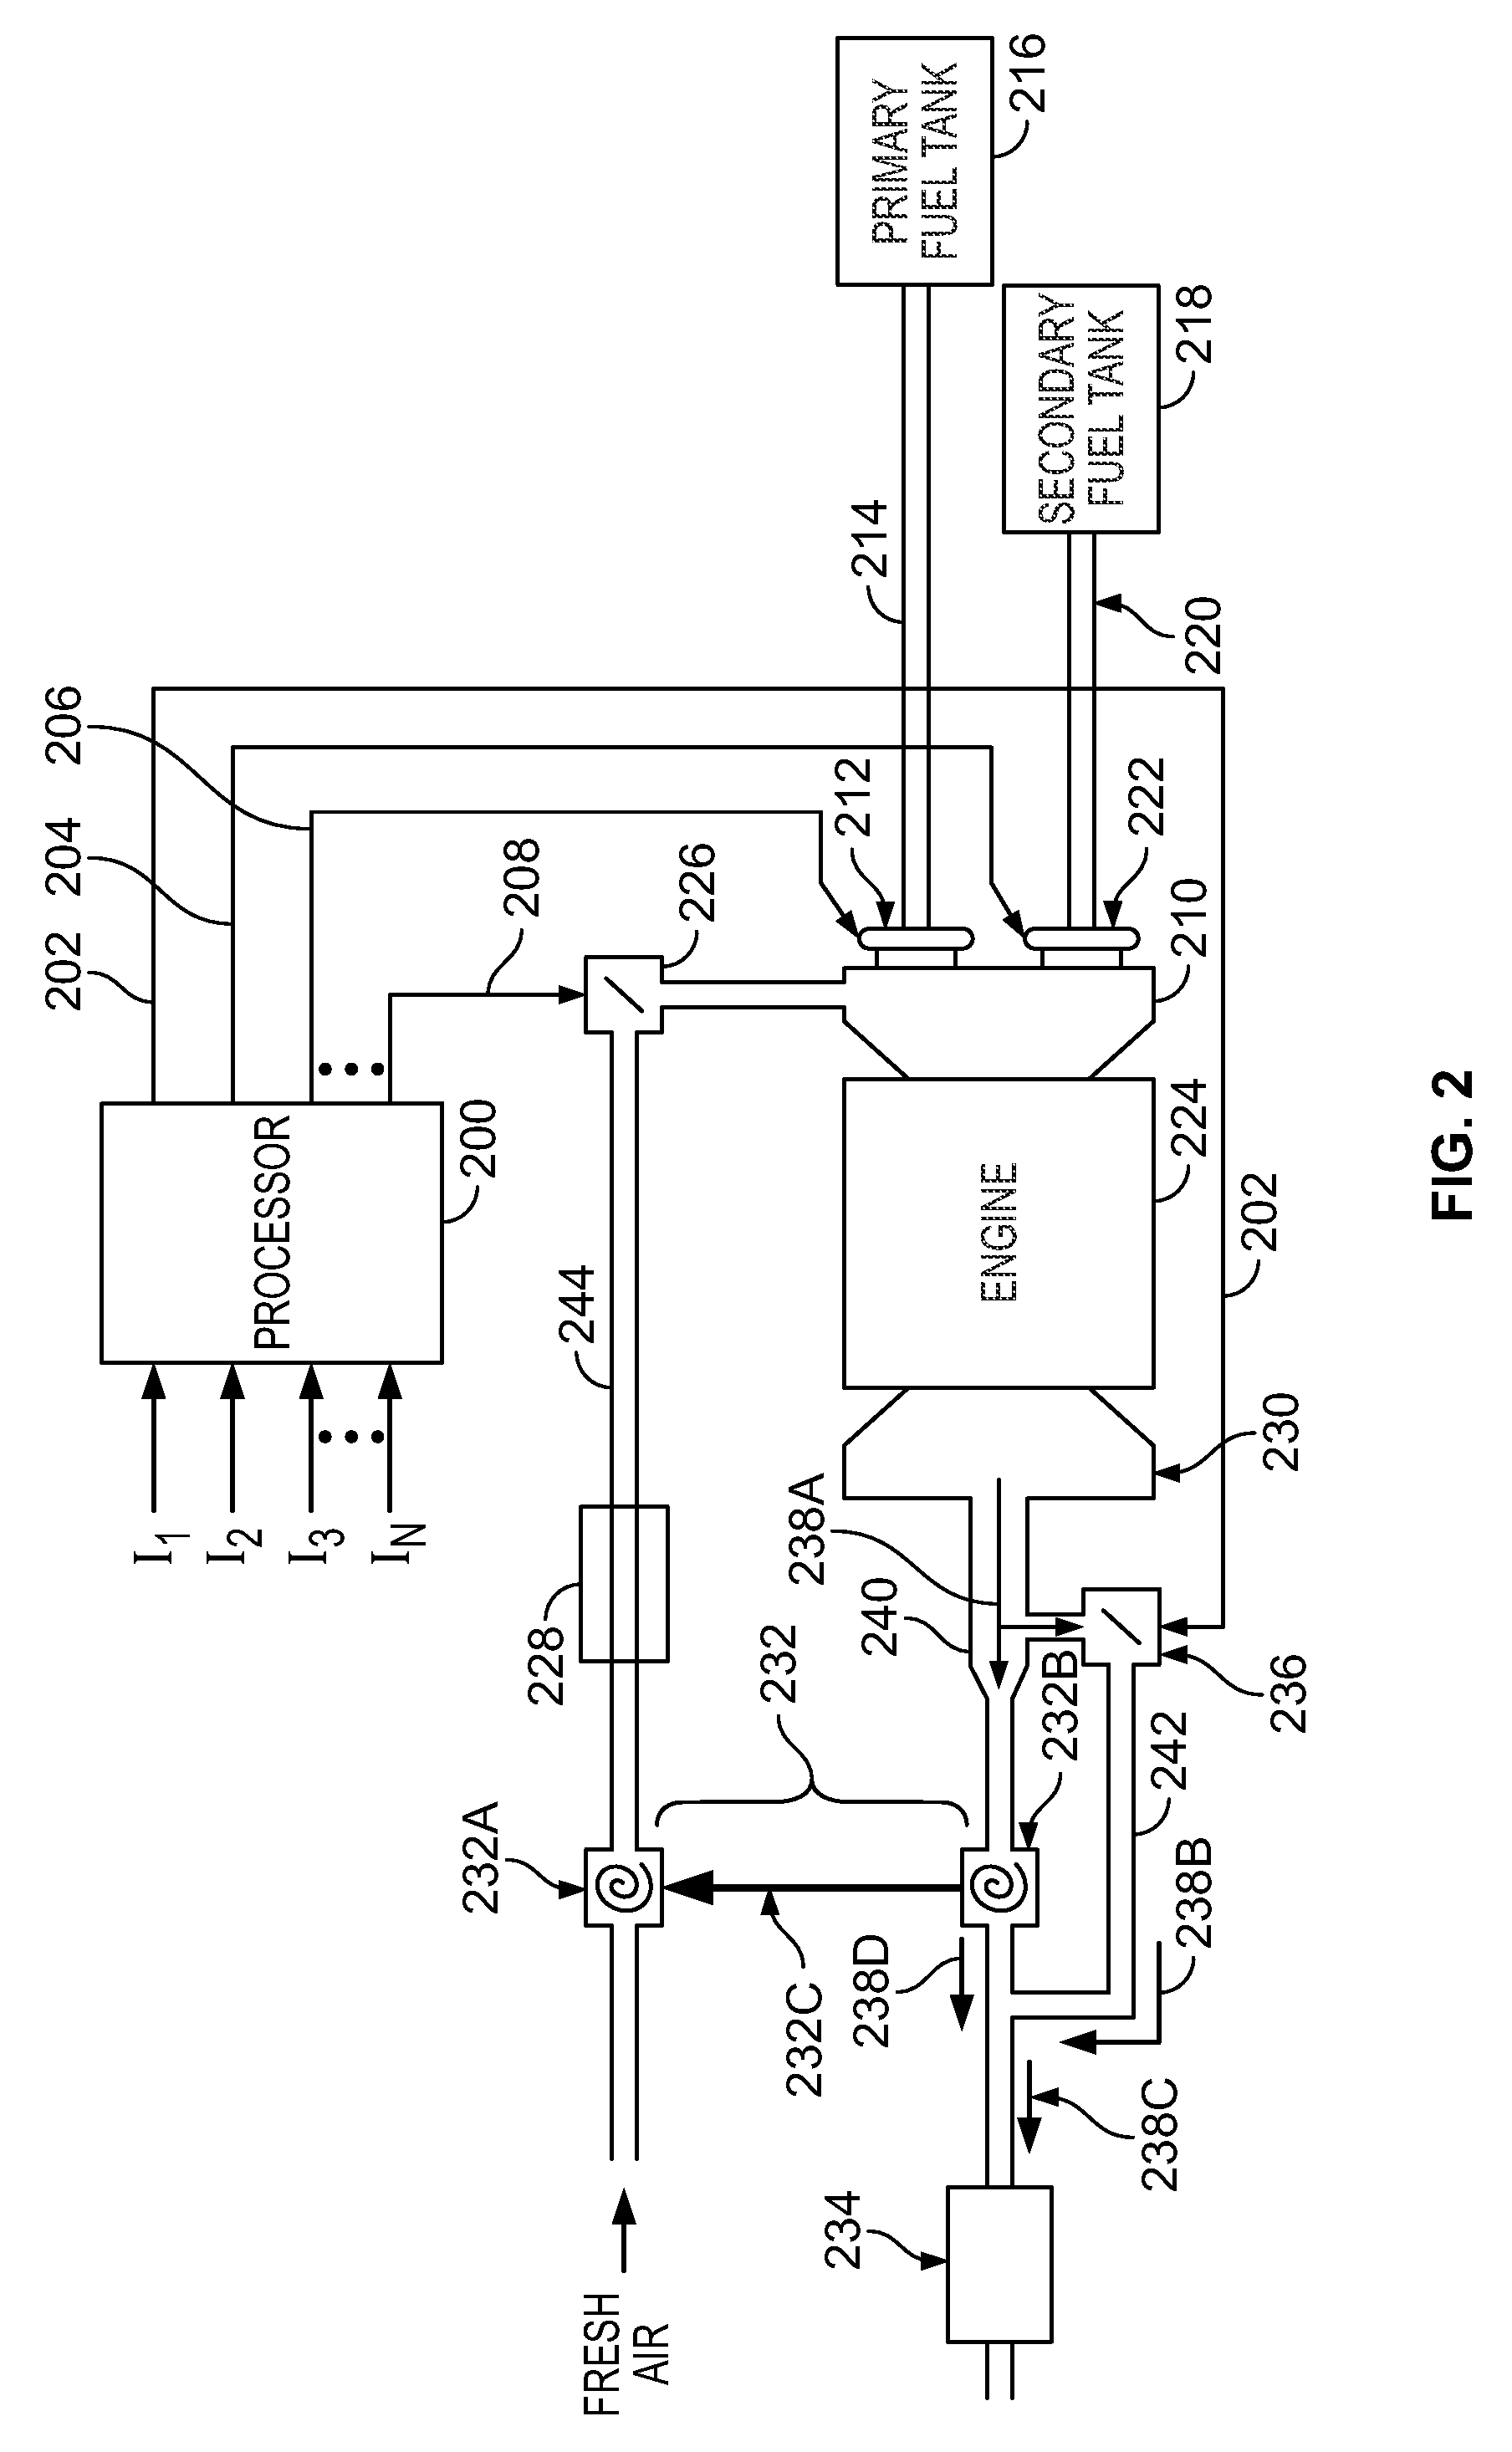 Bi-fuel engine with variable air fuel ratio